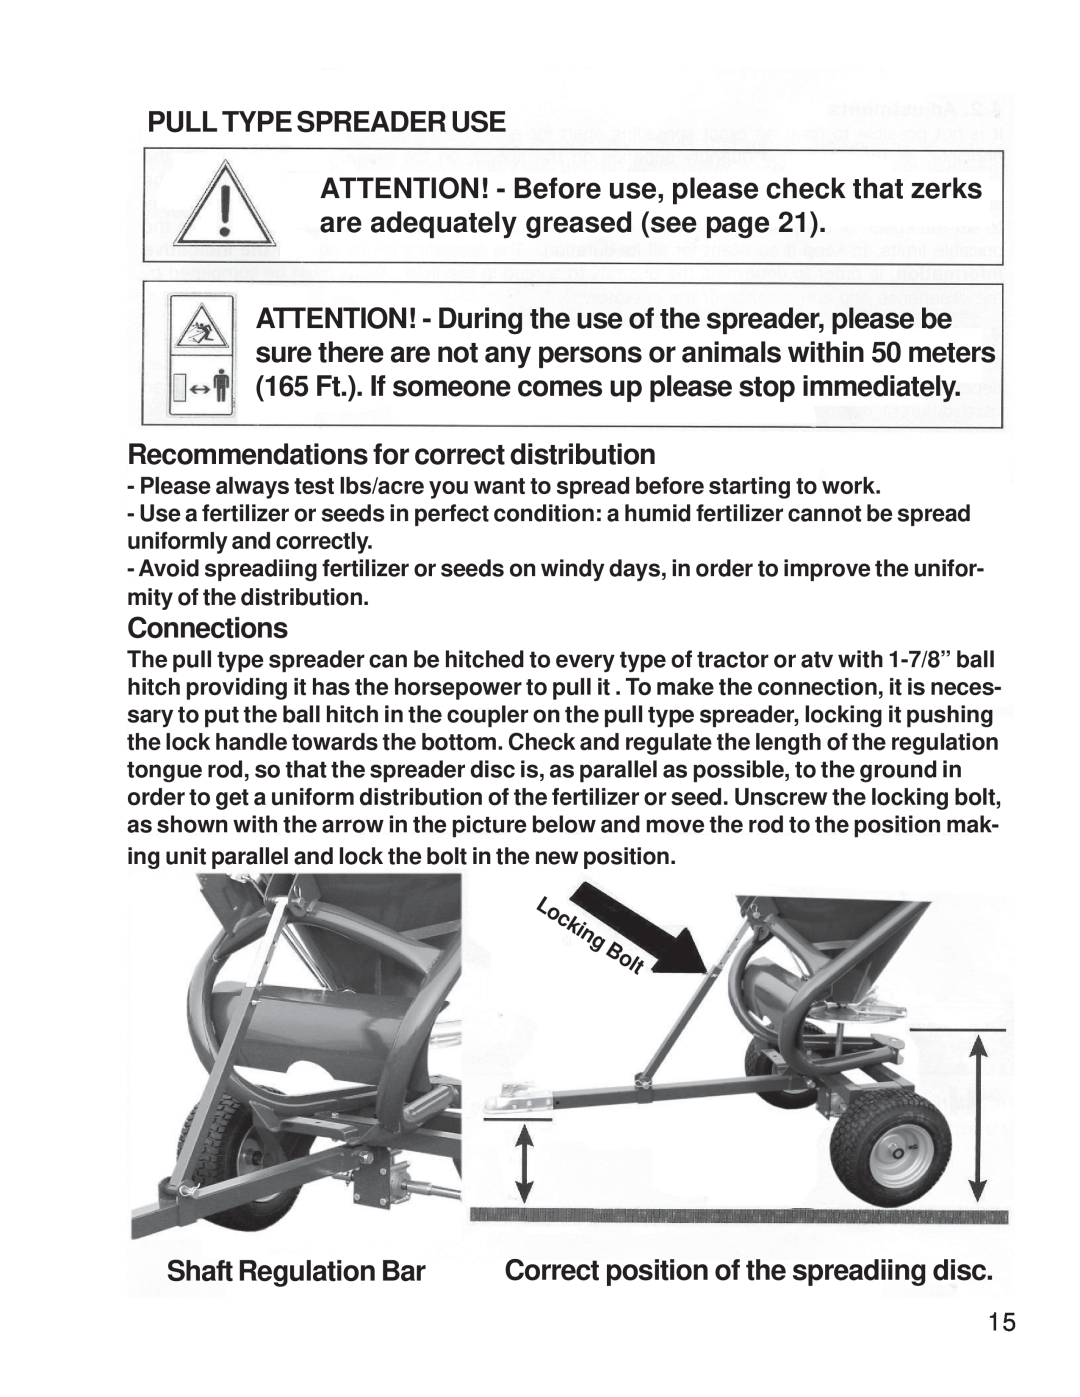 King Kutter S-ATV-180-U manual Pull Type Spreader Use, Recommendations for correct distribution, Connections 